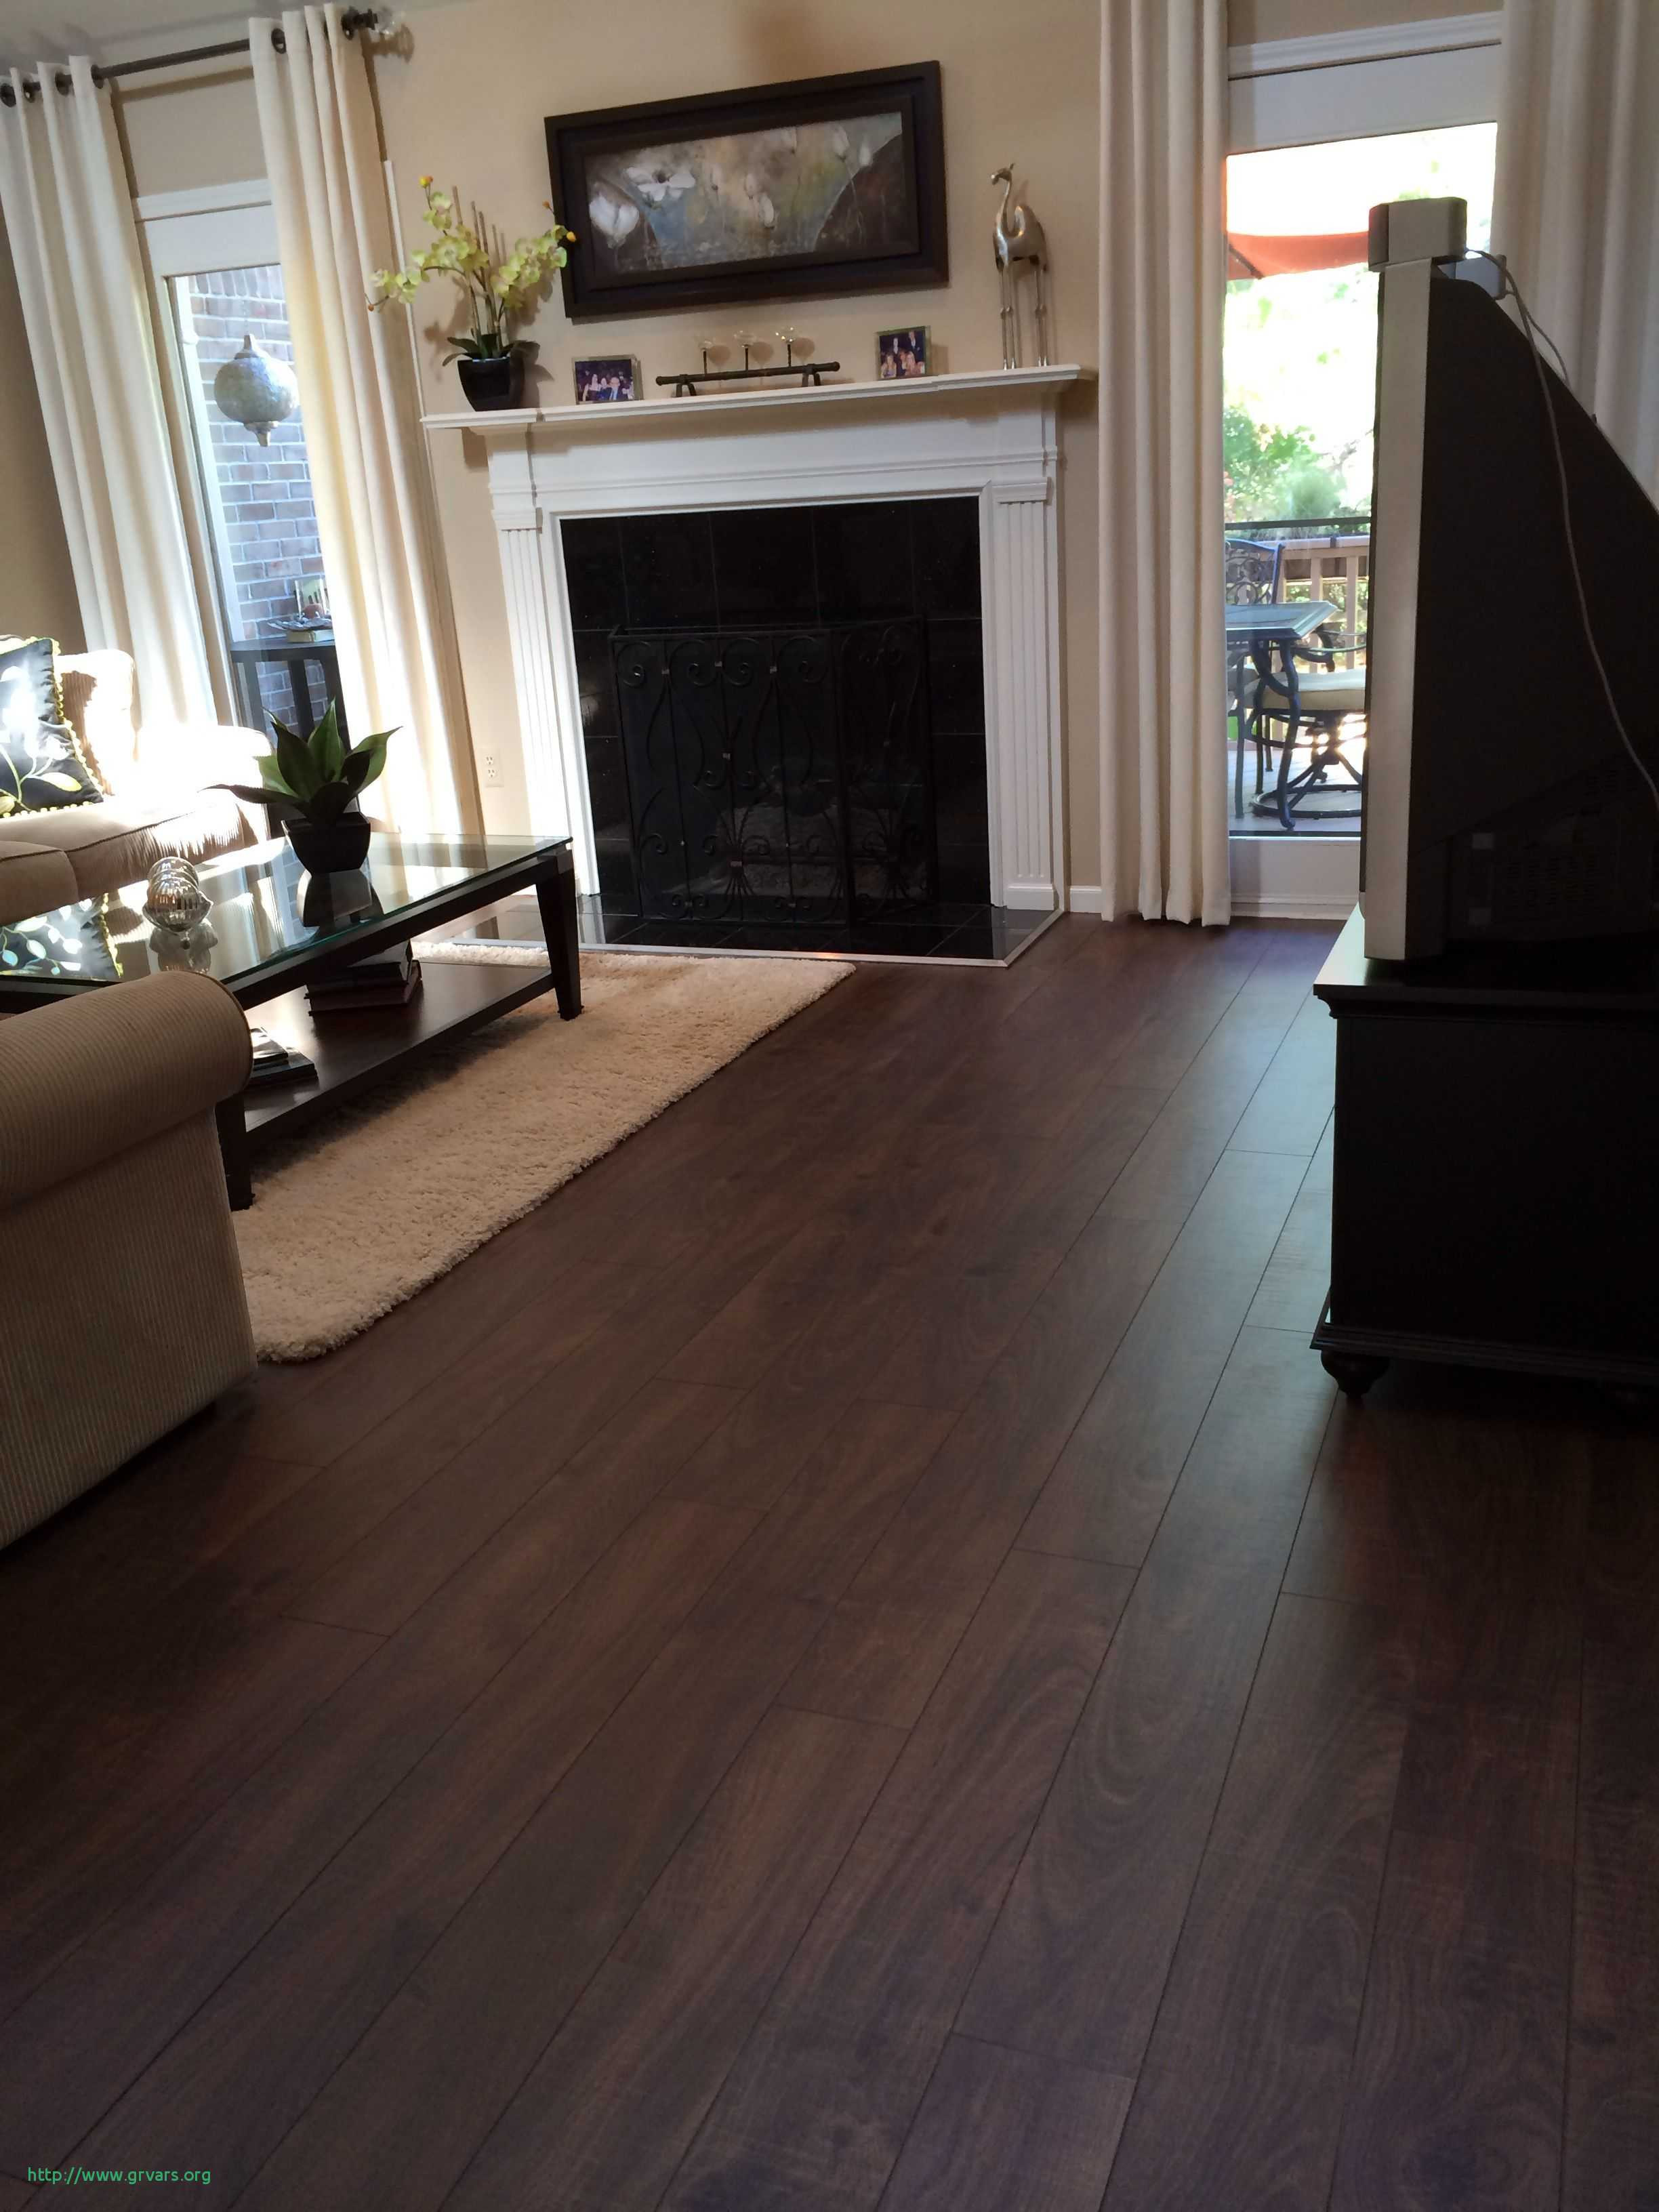 pergo hardwood flooring reviews of 17 nouveau where is pergo flooring made ideas blog in where is pergo flooring made meilleur de 40 how to lay laminate flooring video ideas